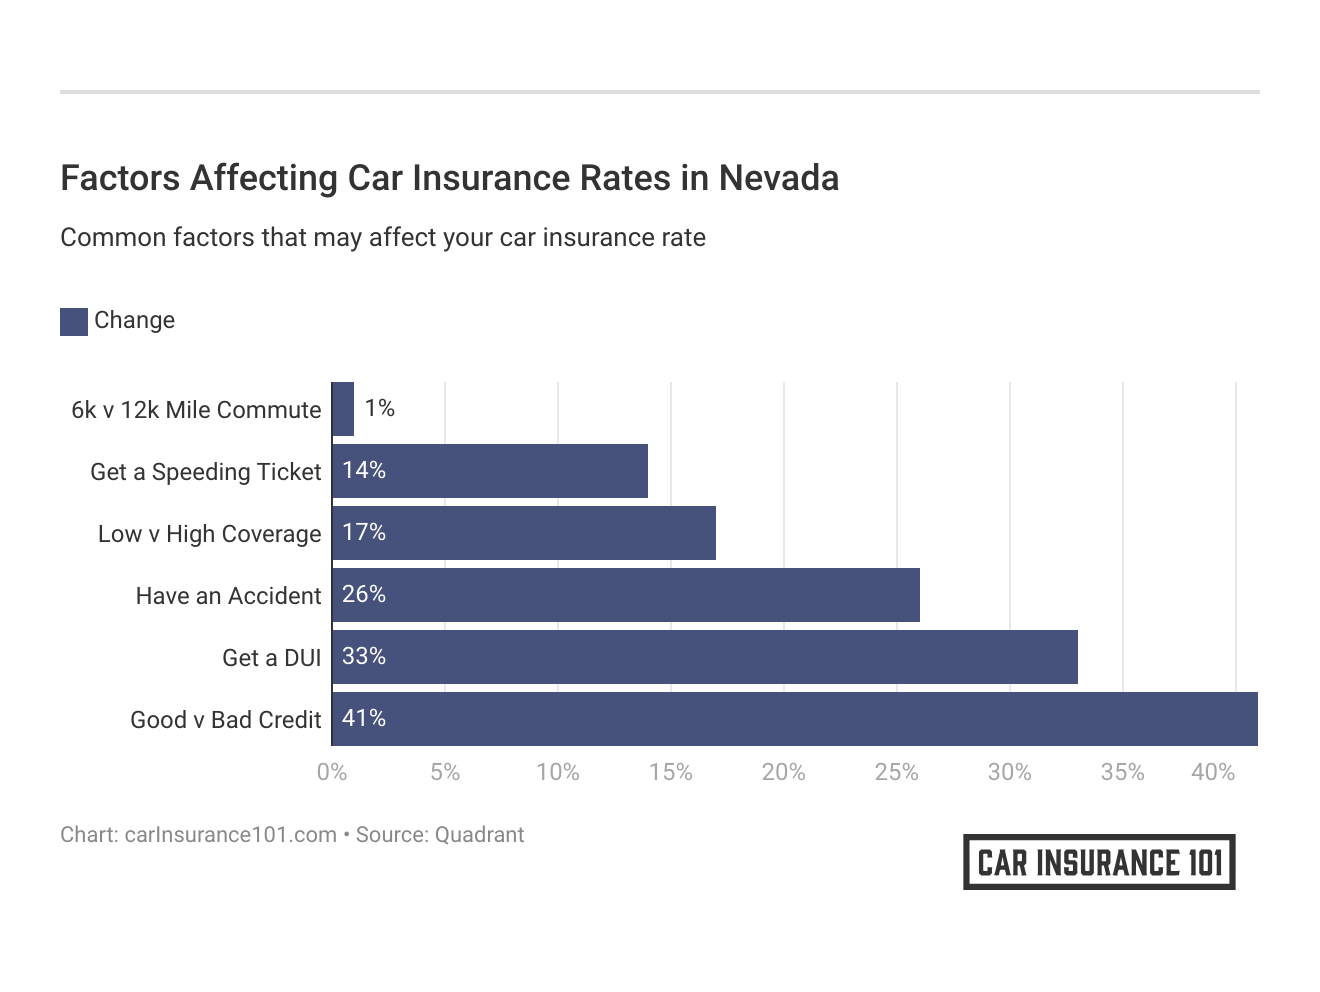 <h3>Factors Affecting Car Insurance Rates in Nevada</h3>